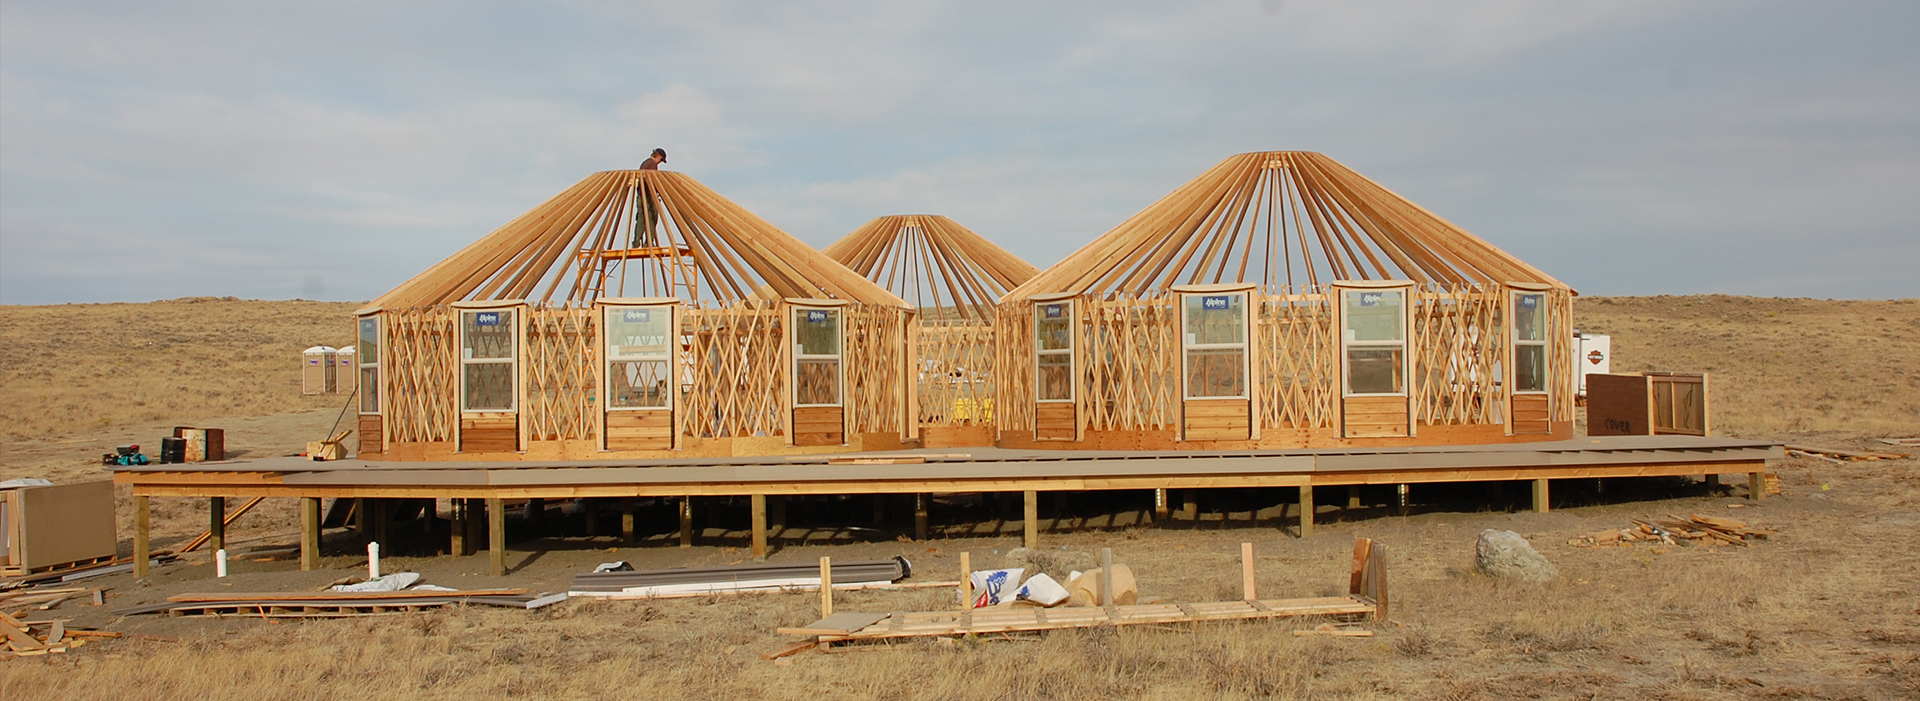 3 shelter designs yurts framed with windows installed